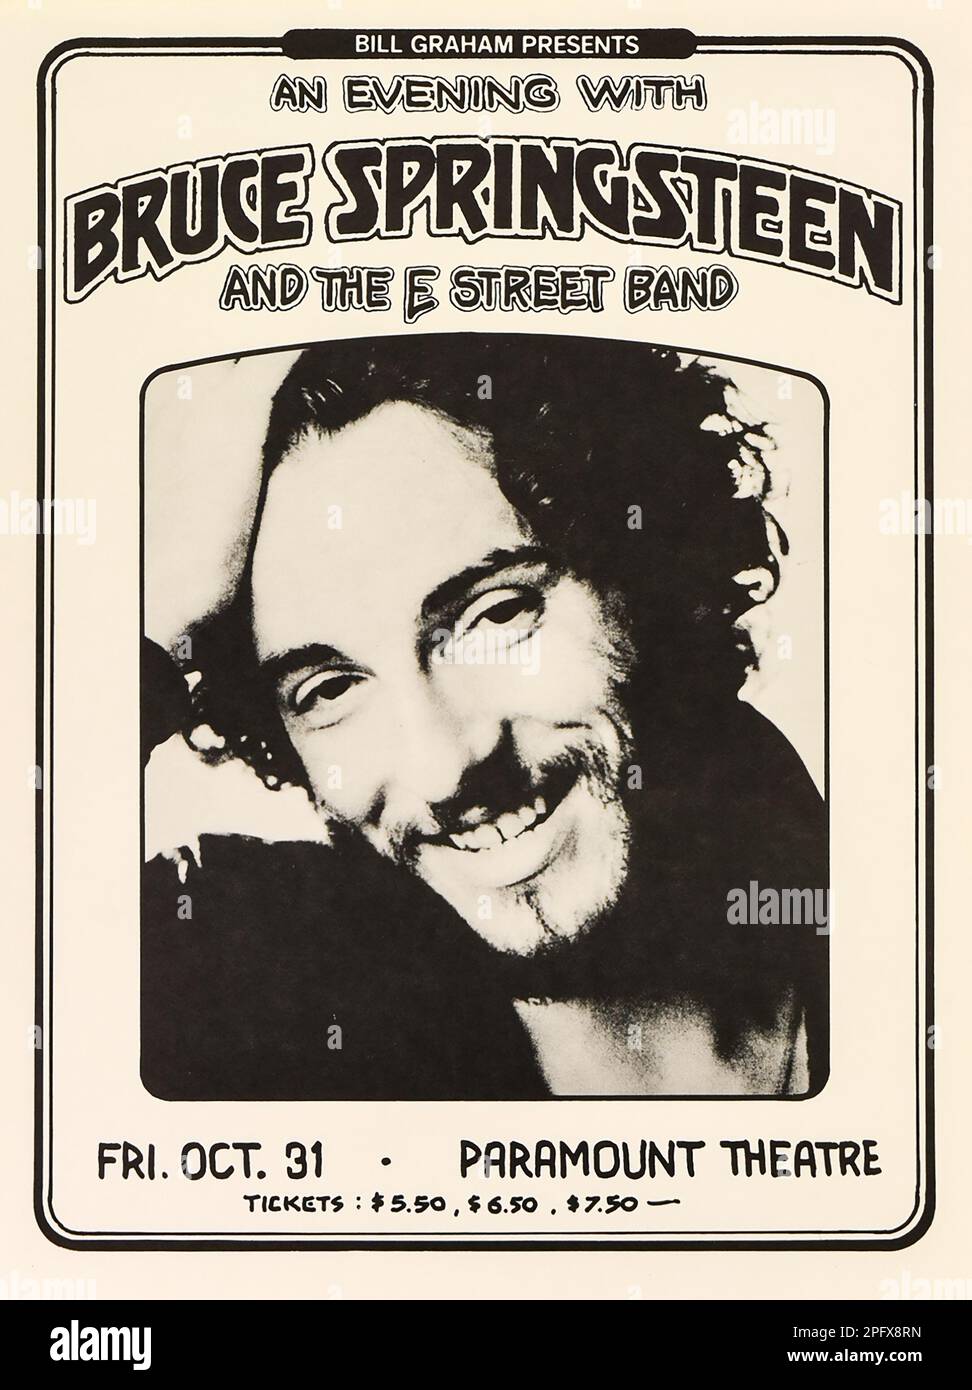 1975 – BRUCE SPRINGSTEEN & THE E STREET BAND - PARAMOUNT THEATRE CONCERT POSTER Stock Photo